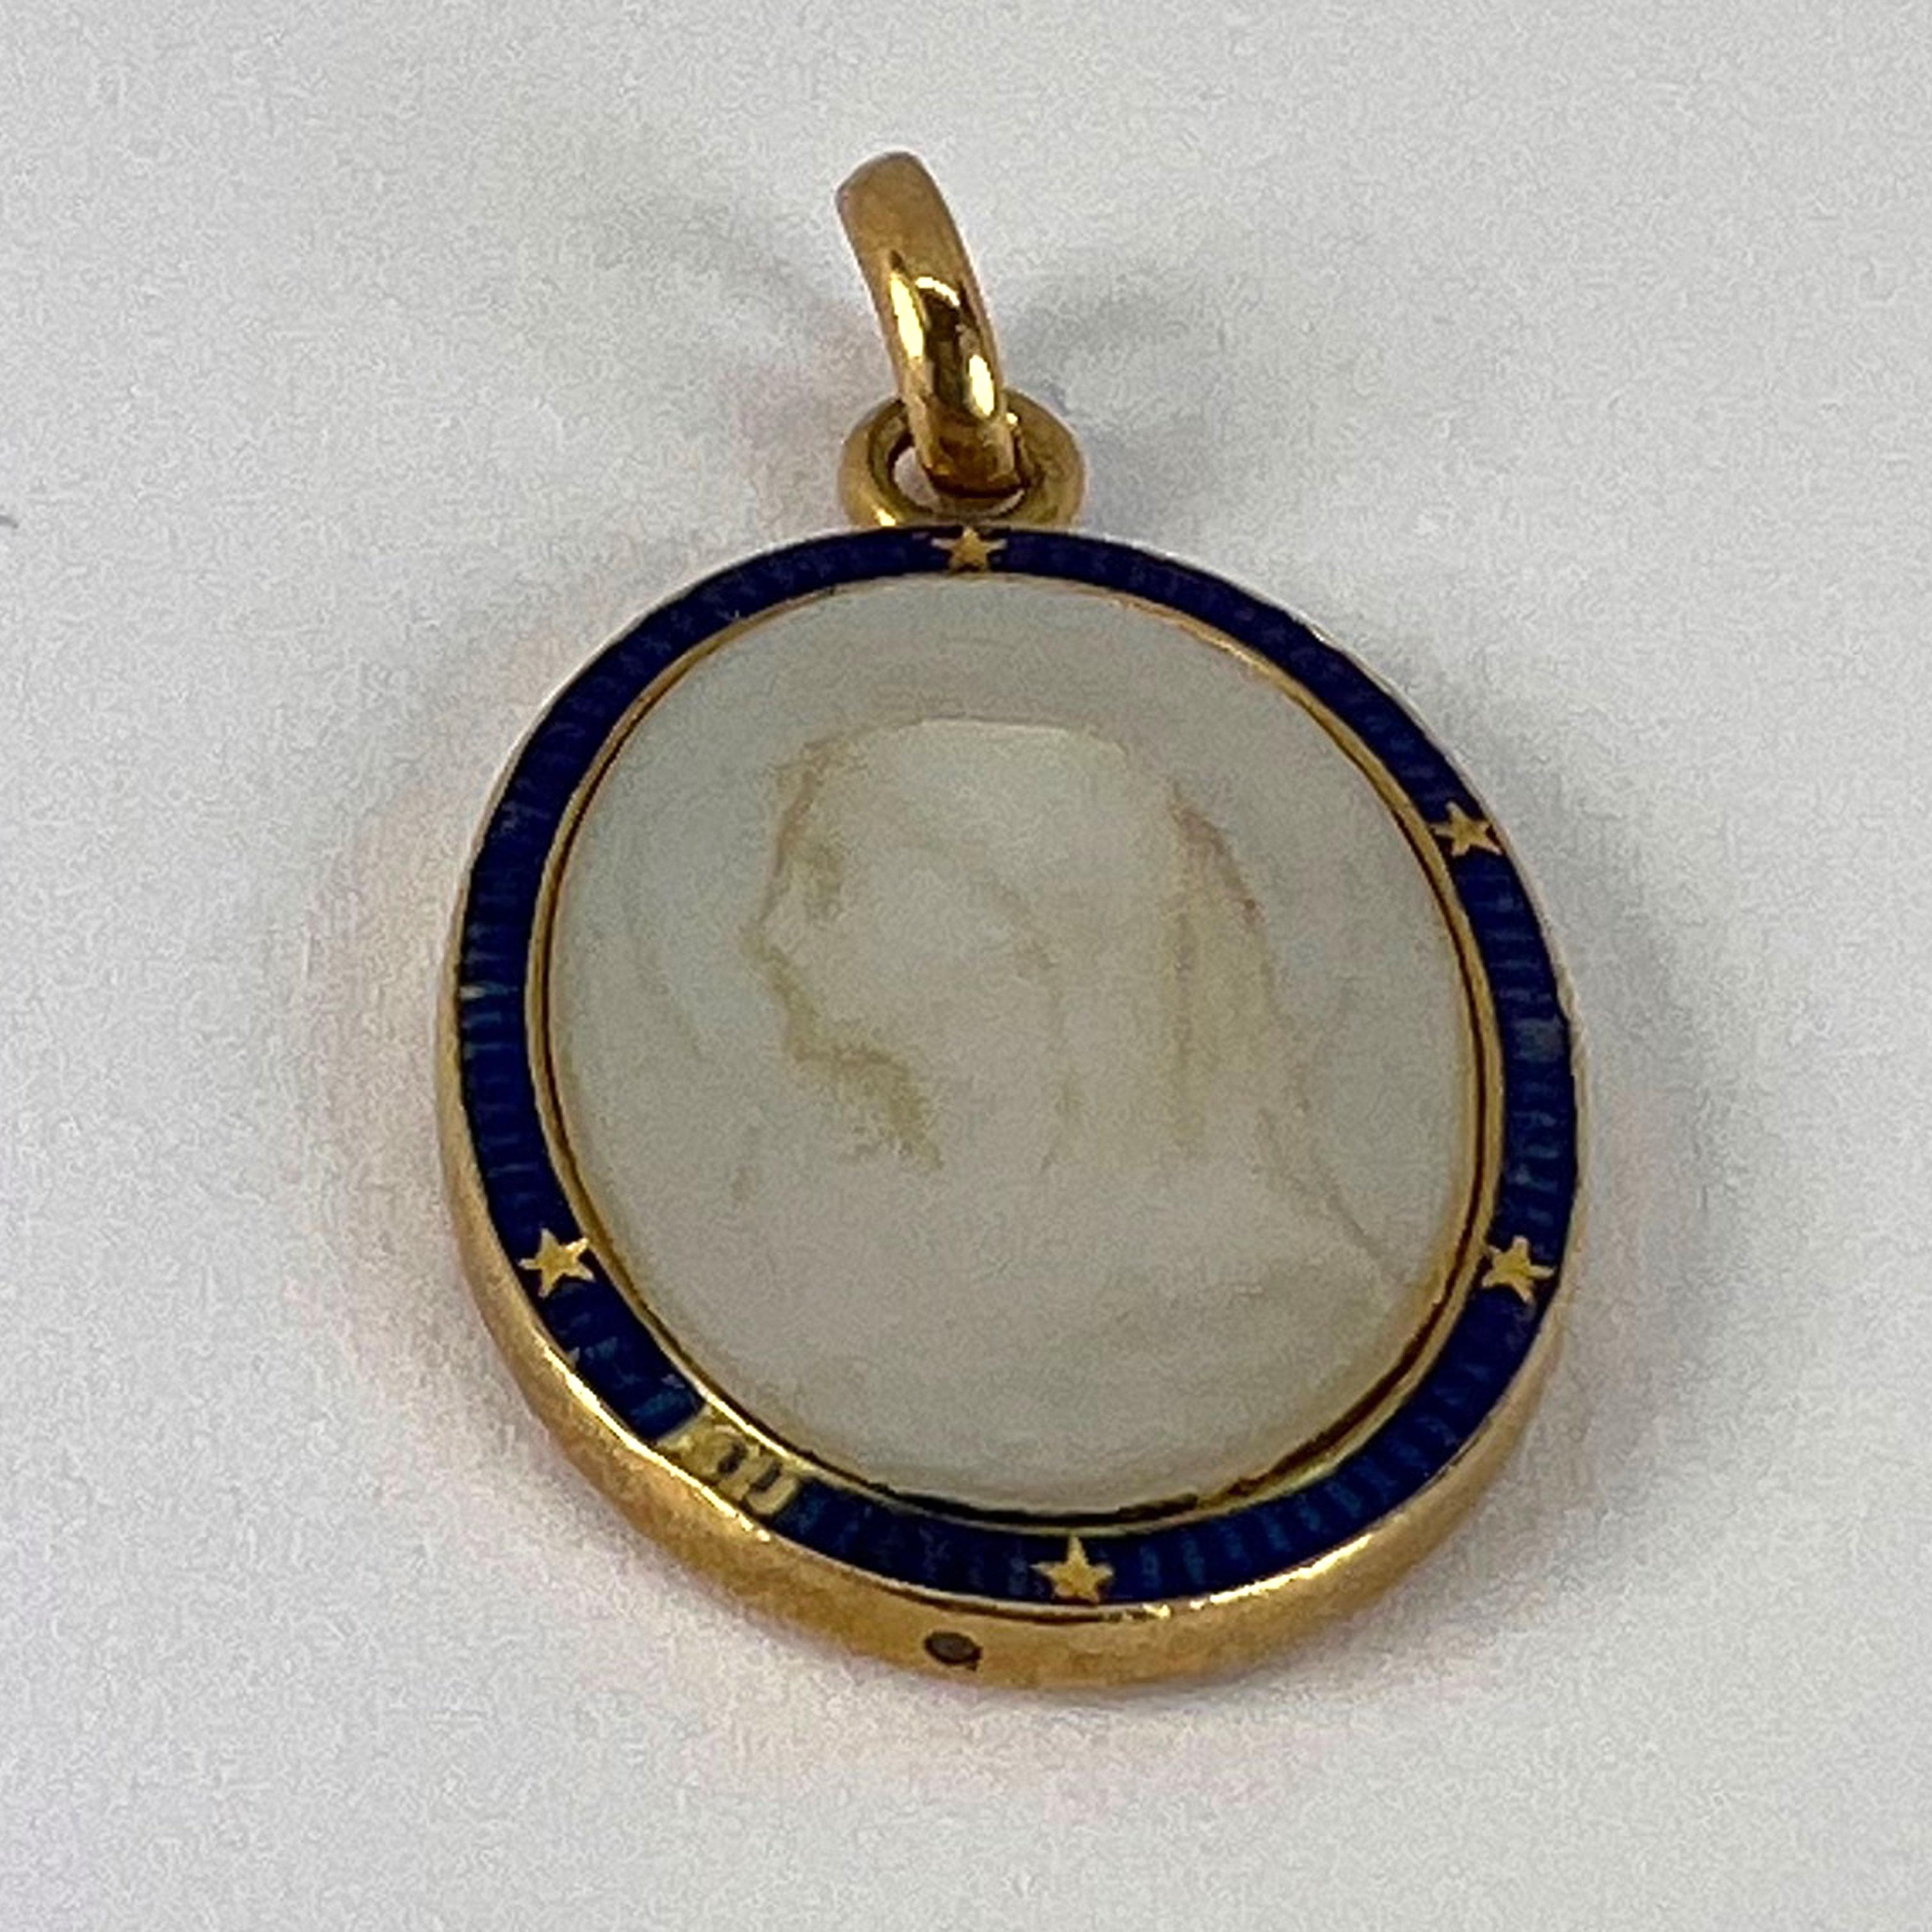 French Virgin Mary 18K Yellow Gold Mother of Pearl Enamel Charm Pendant 6